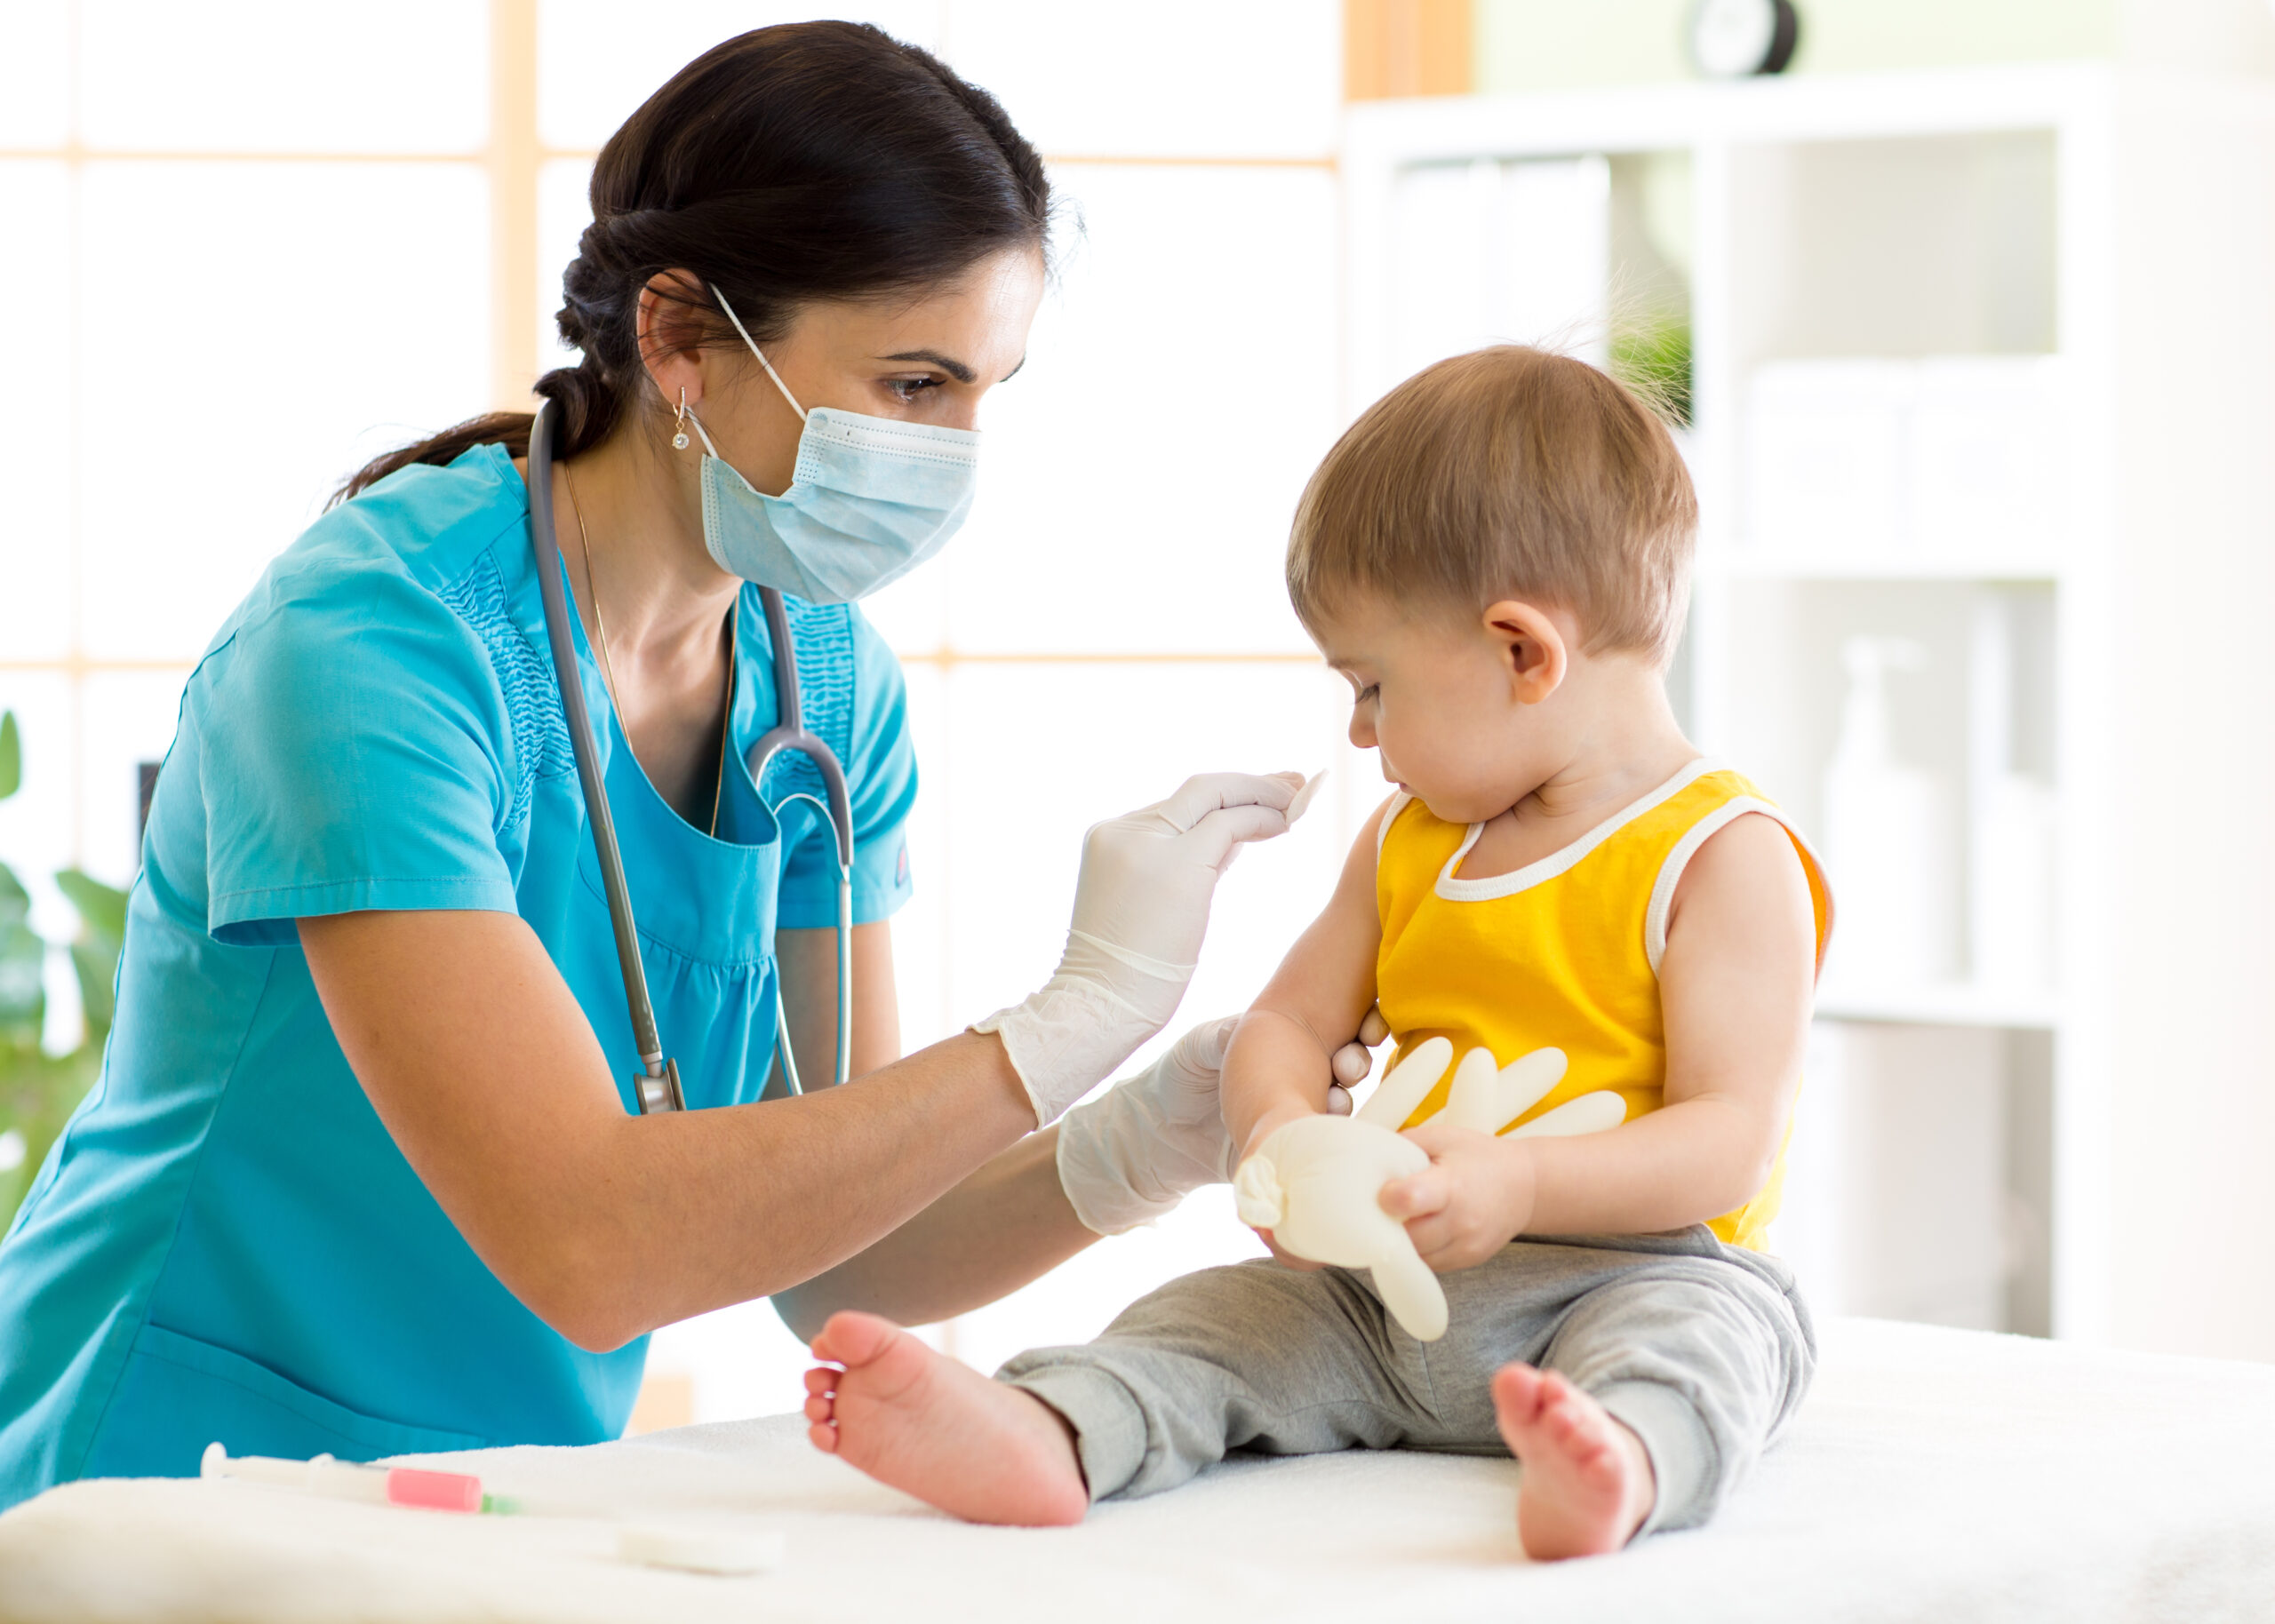 Toddler preparing to receive a vaccination